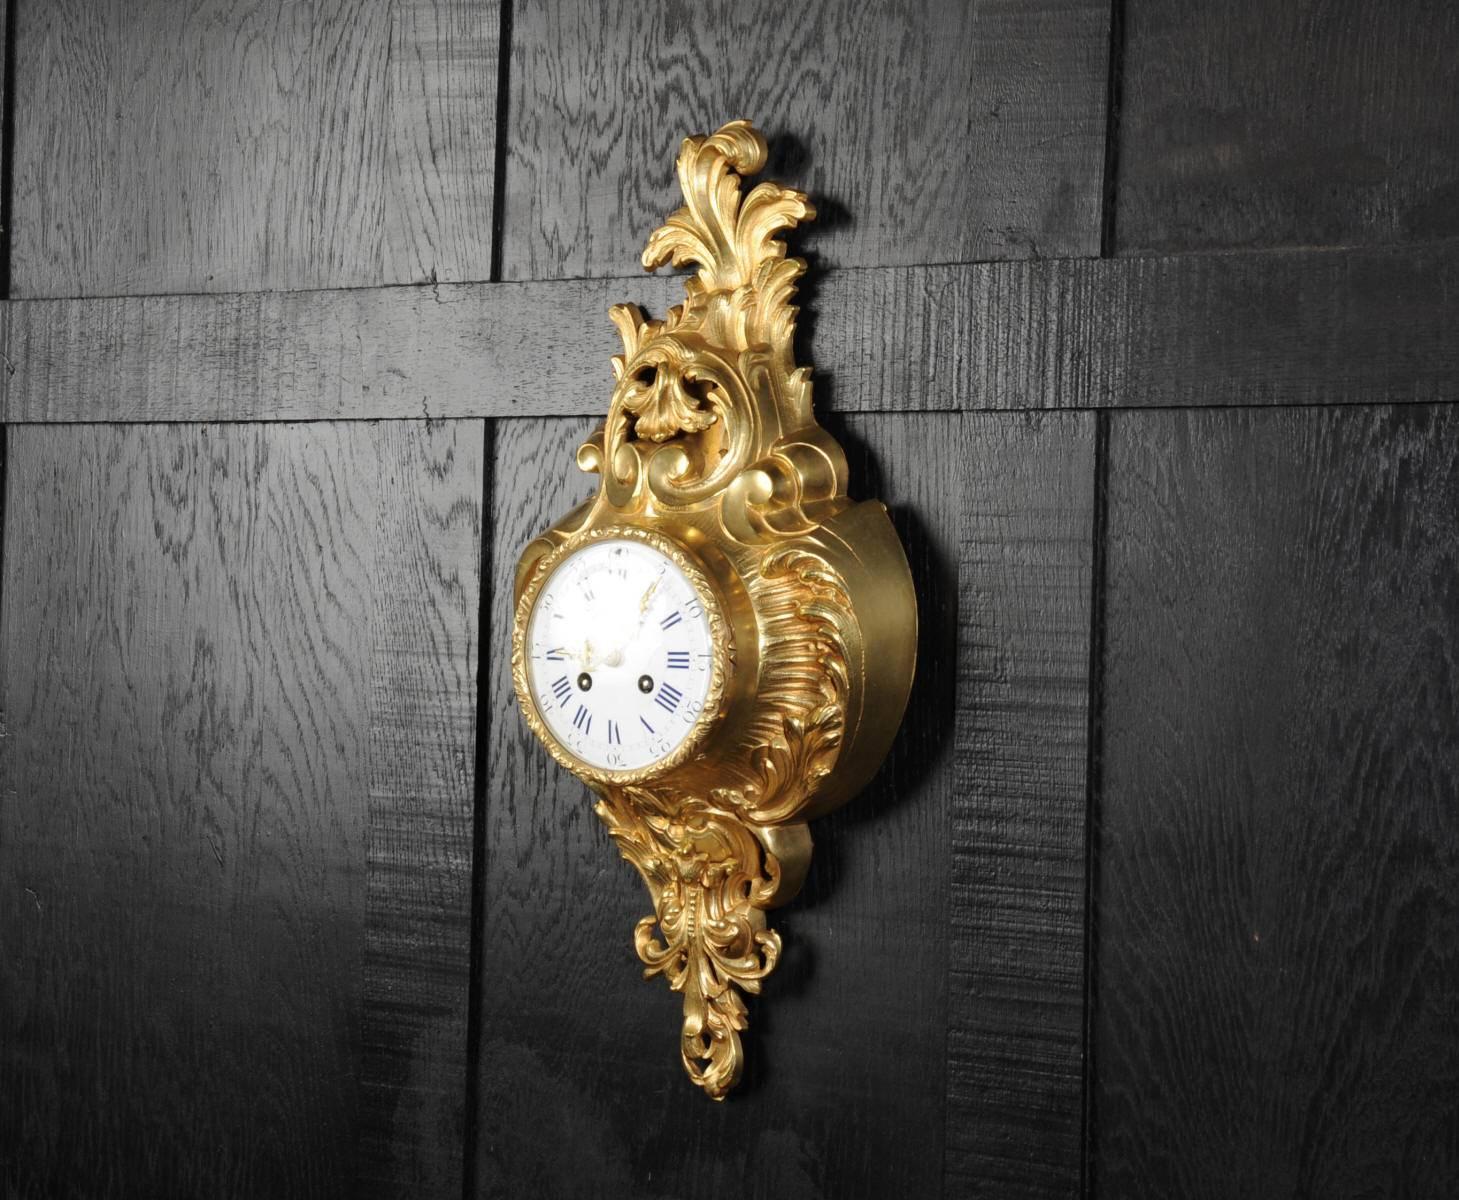 A very decorative antique French gilt bronze Cartel wall clock by Samuel Marti. It is Rococo in style, asymmetric with acanthus shoulders and a large acanthus leaf top. Acanthus flowers hang below the dial. It is in stunning condition, finely